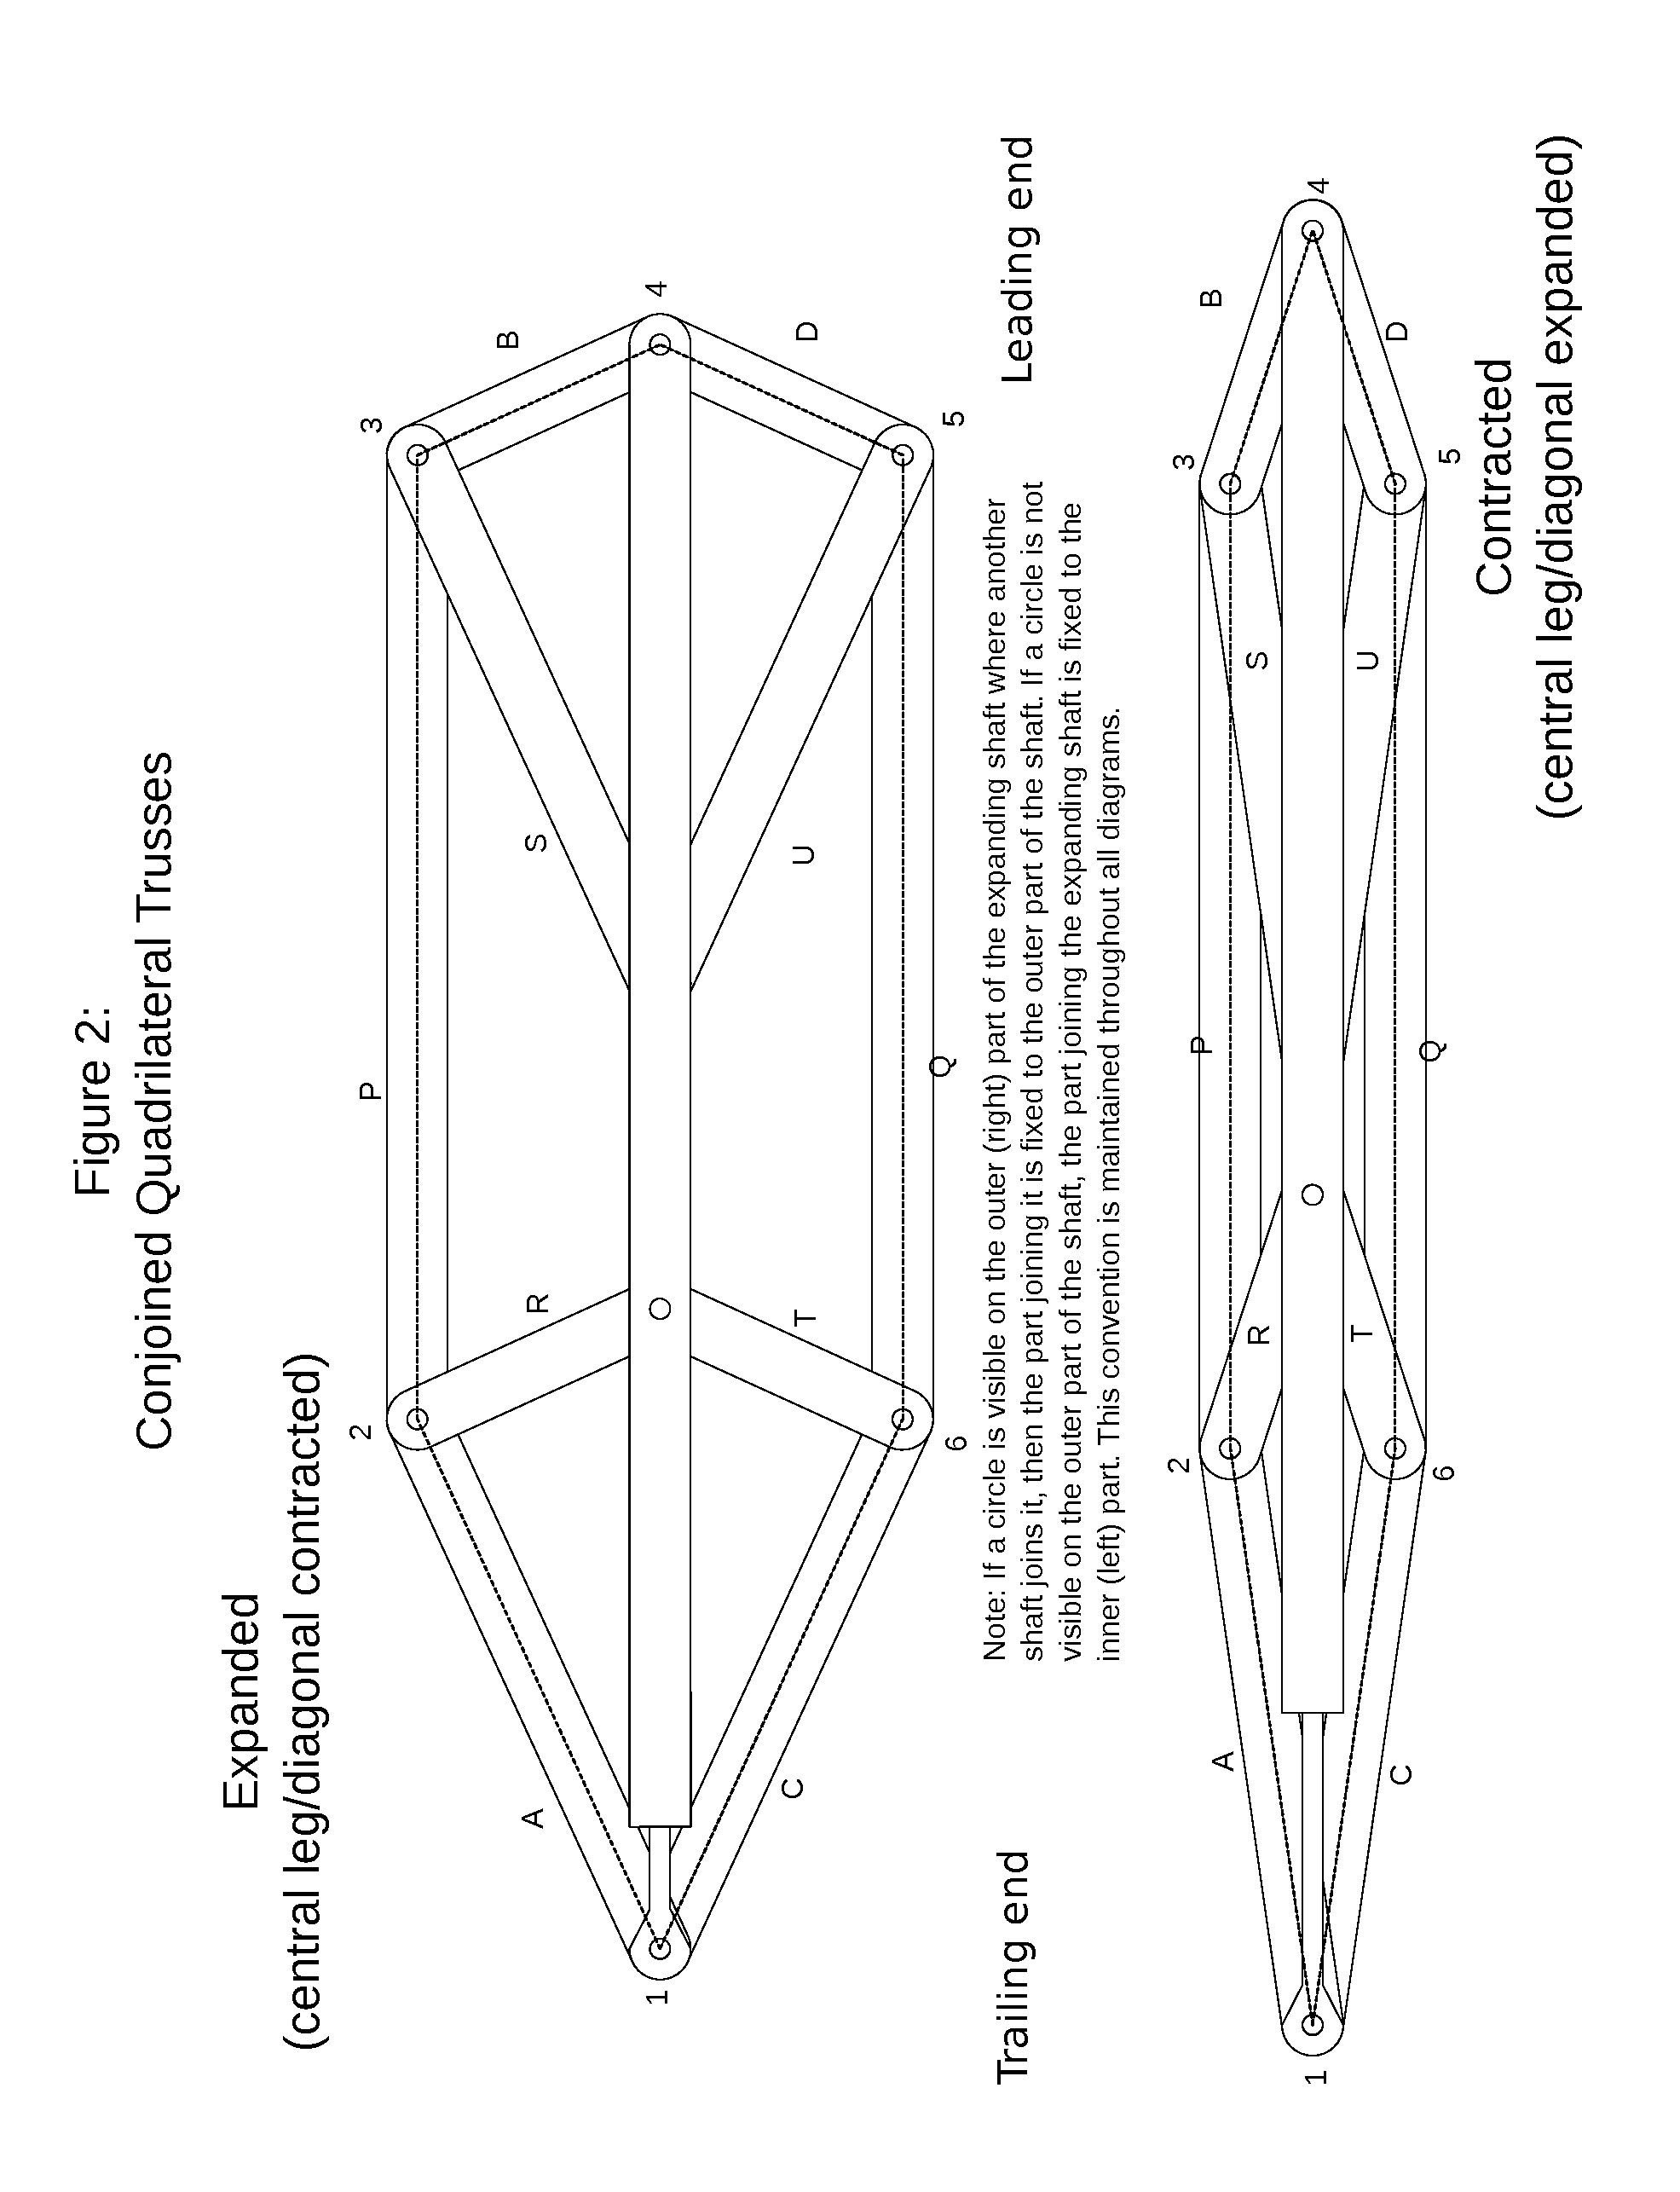 Aerodynamic Variable Cross-Section Airfoil and Constant Lateral Surface Area Truss